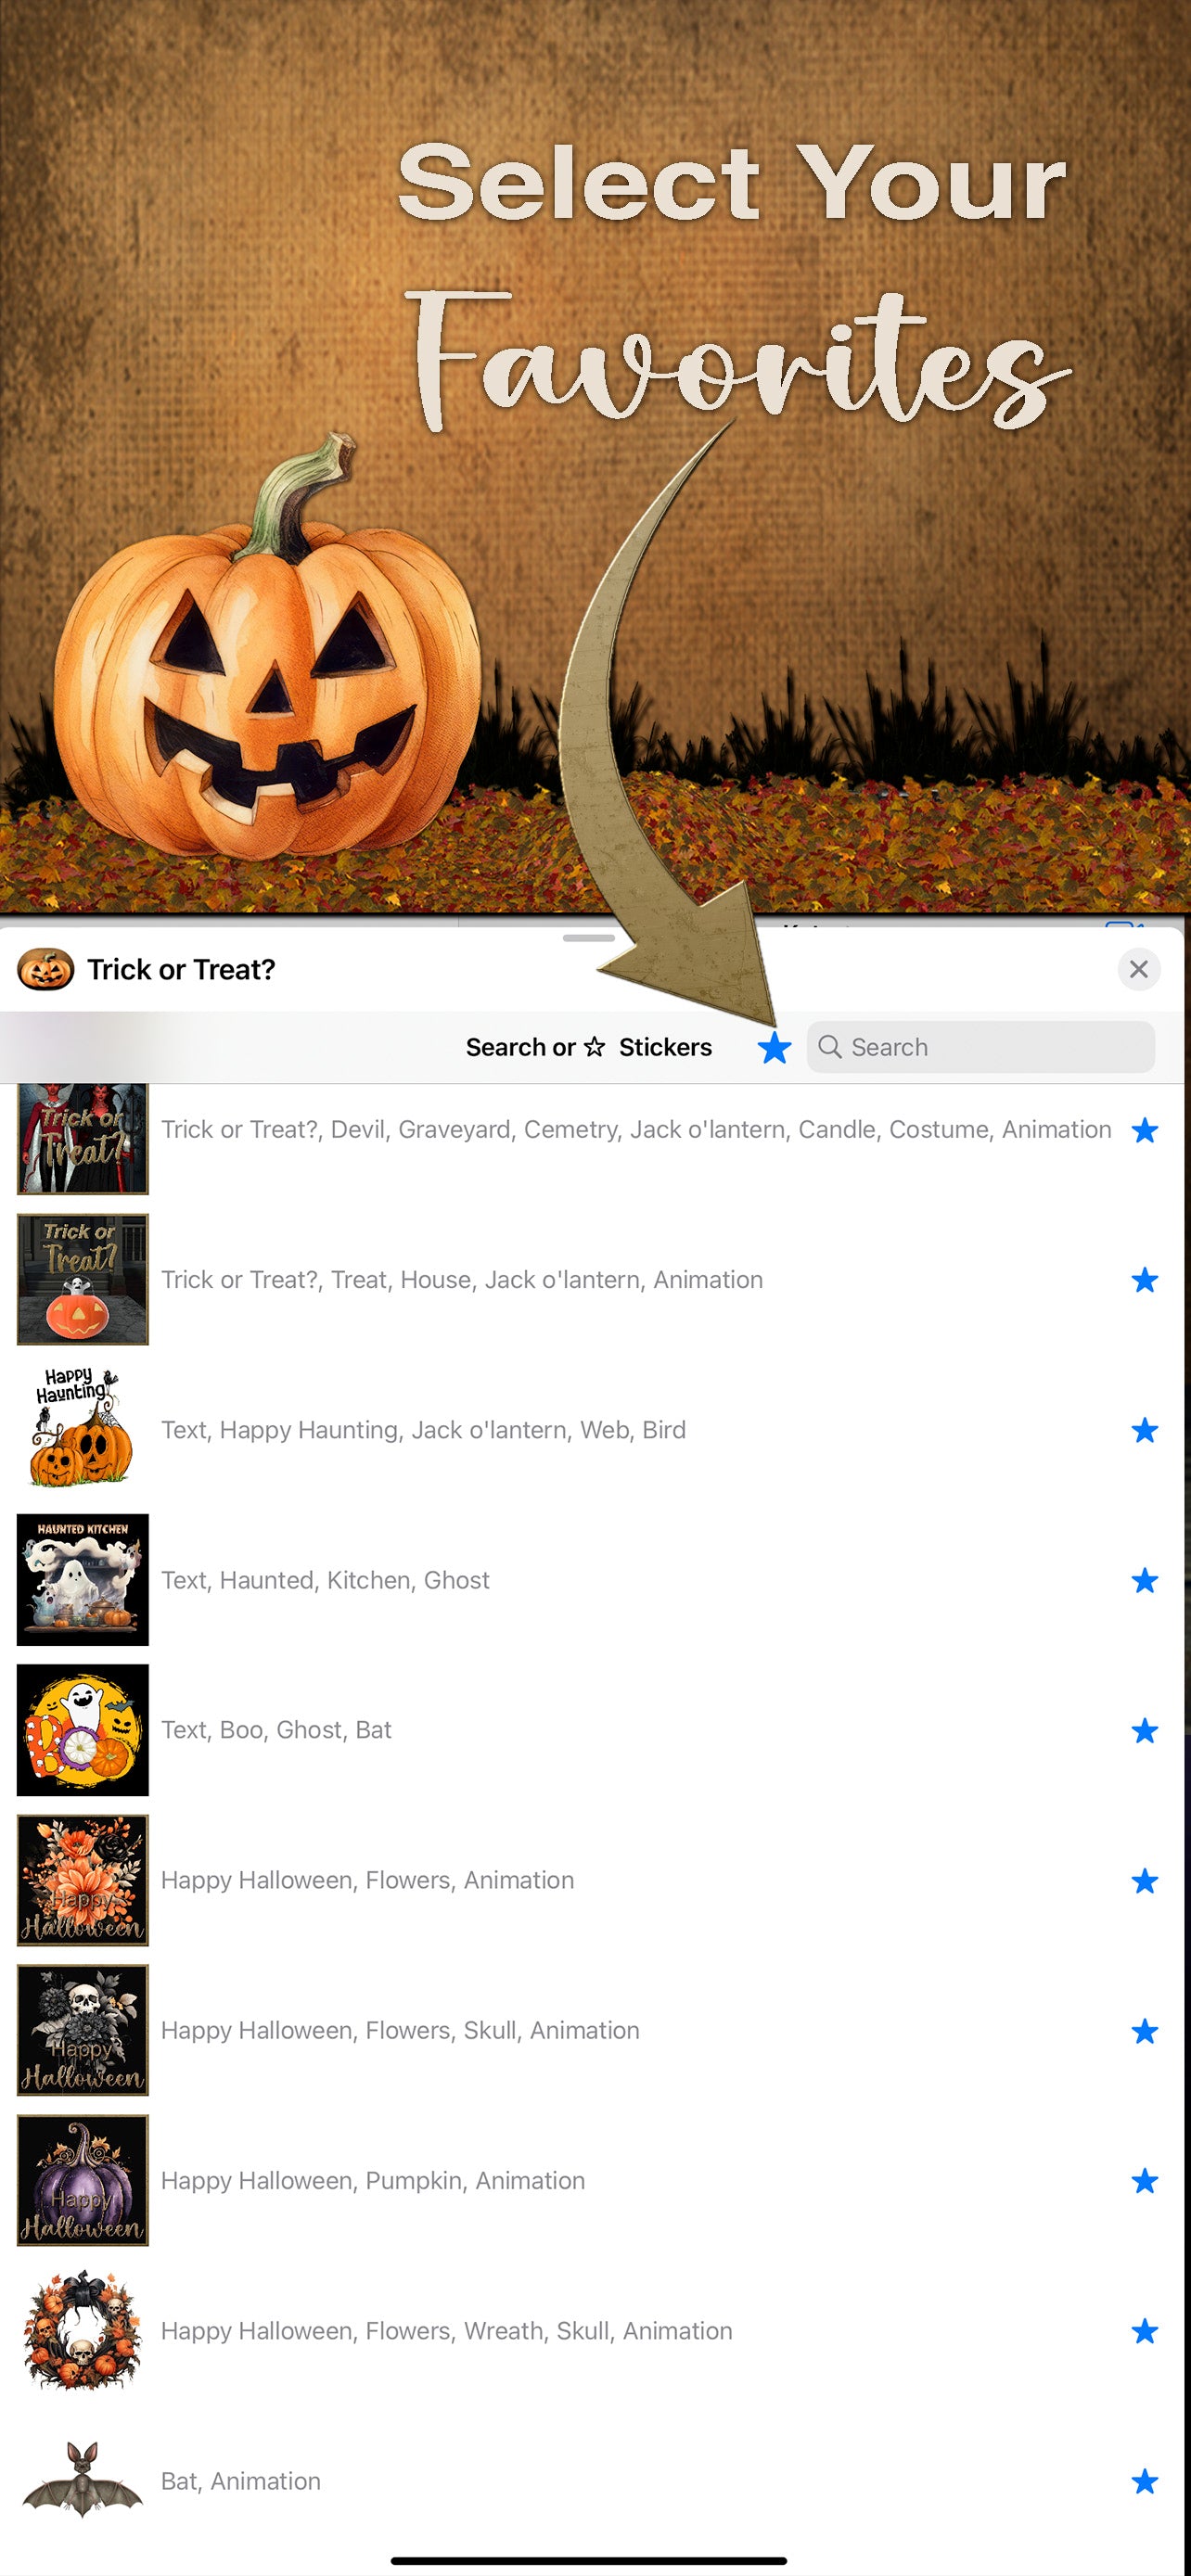 More Than Charms Trick or Treat? Stickers For iMessage